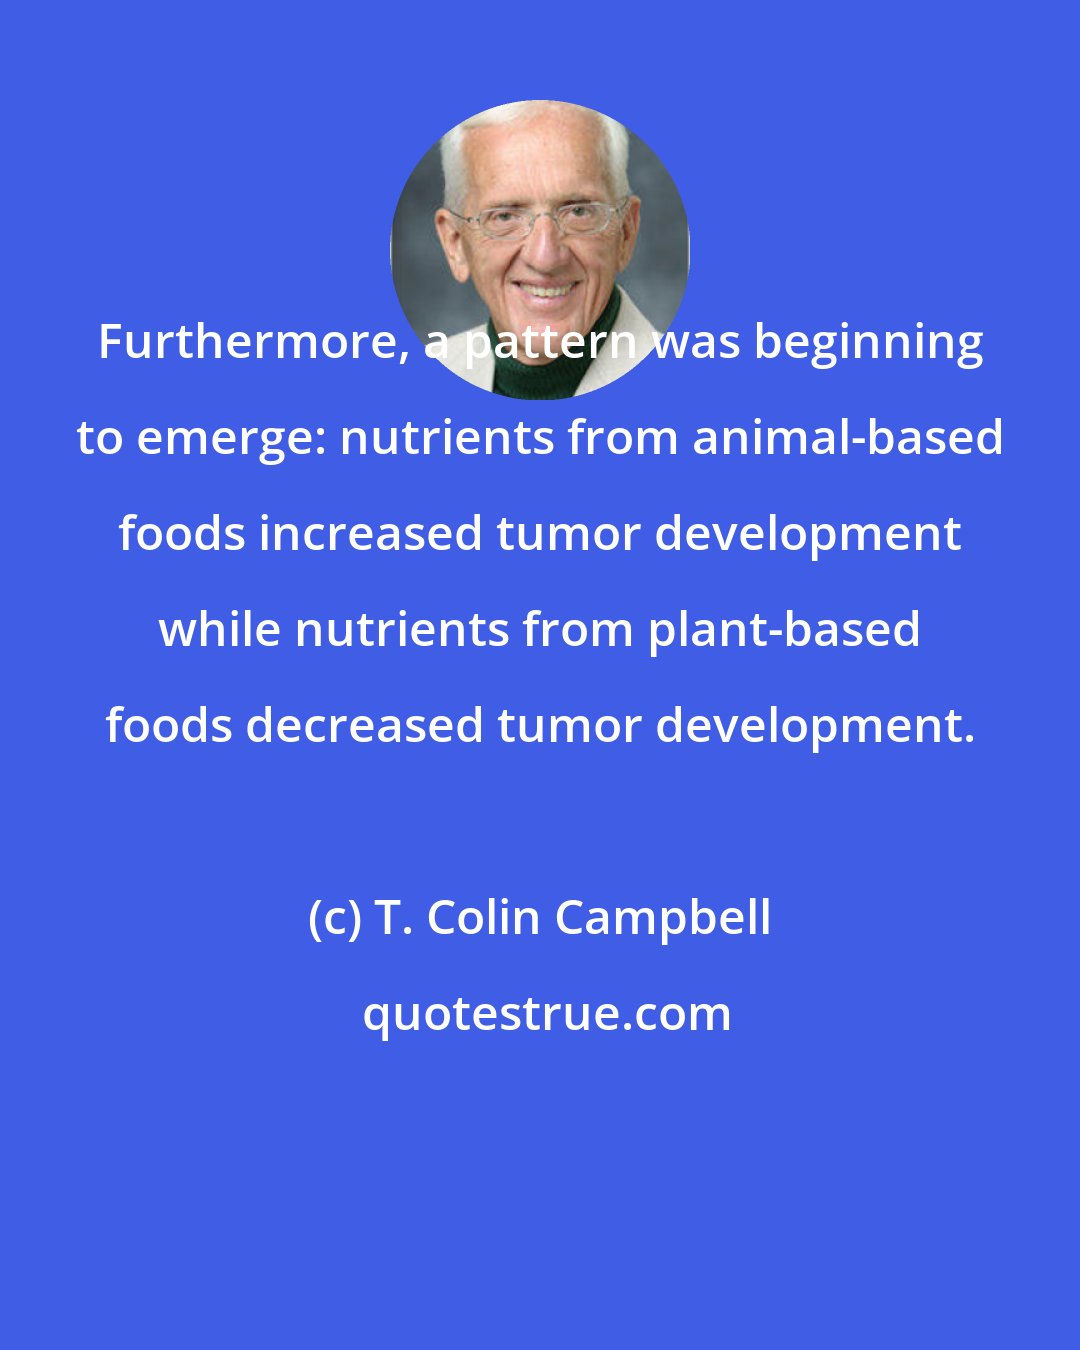 T. Colin Campbell: Furthermore, a pattern was beginning to emerge: nutrients from animal-based foods increased tumor development while nutrients from plant-based foods decreased tumor development.